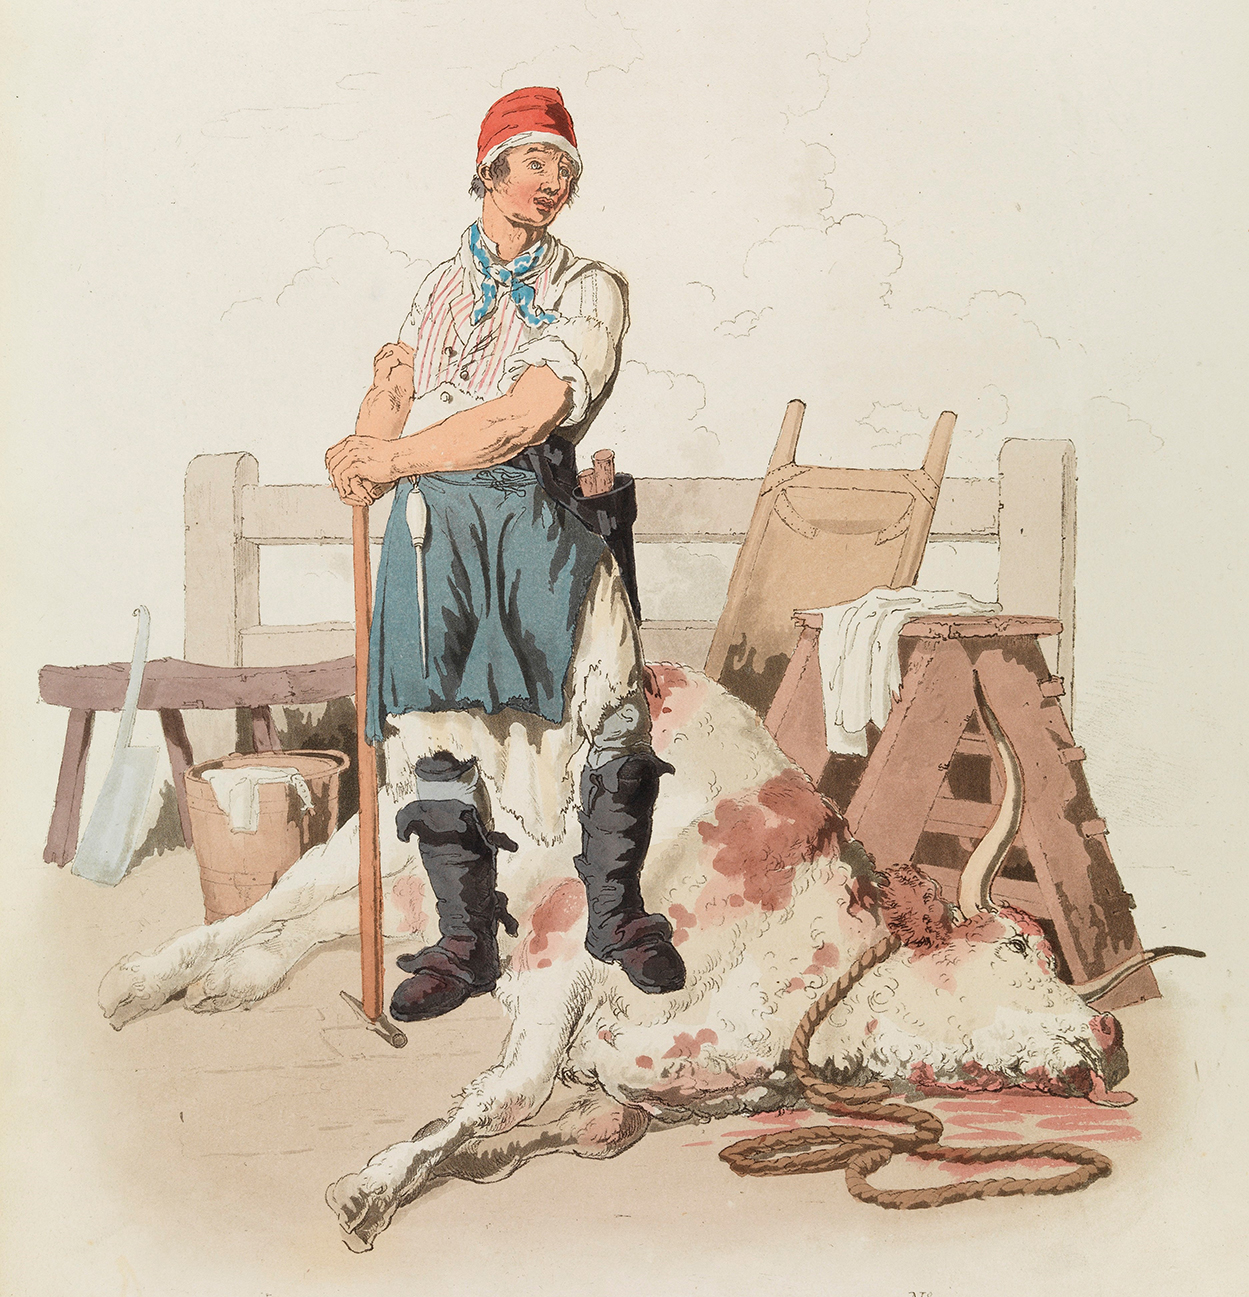 W.H. Pyne,The Slaughterman, 1804. Wellcome Library, London.